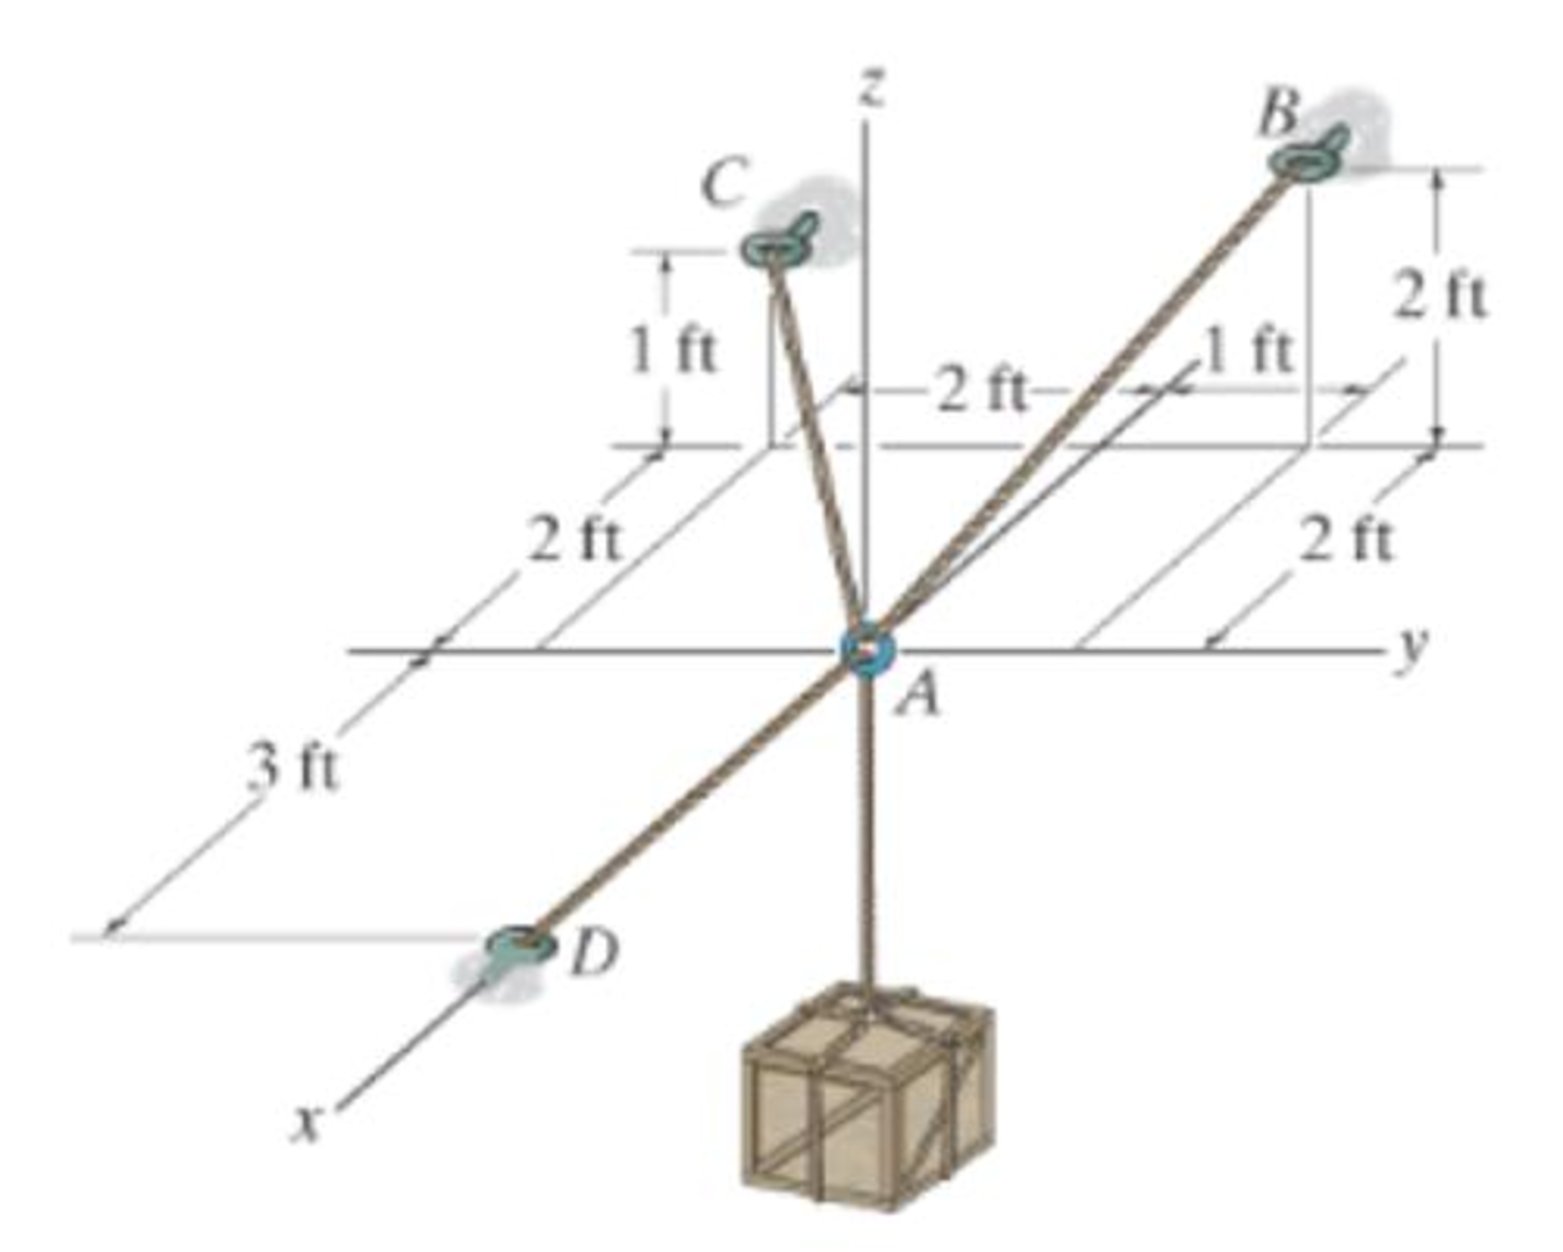 Chapter 3.4, Problem 67P, Determine the maximum weight of the crate so that the tension developed in any cable does not exceed 